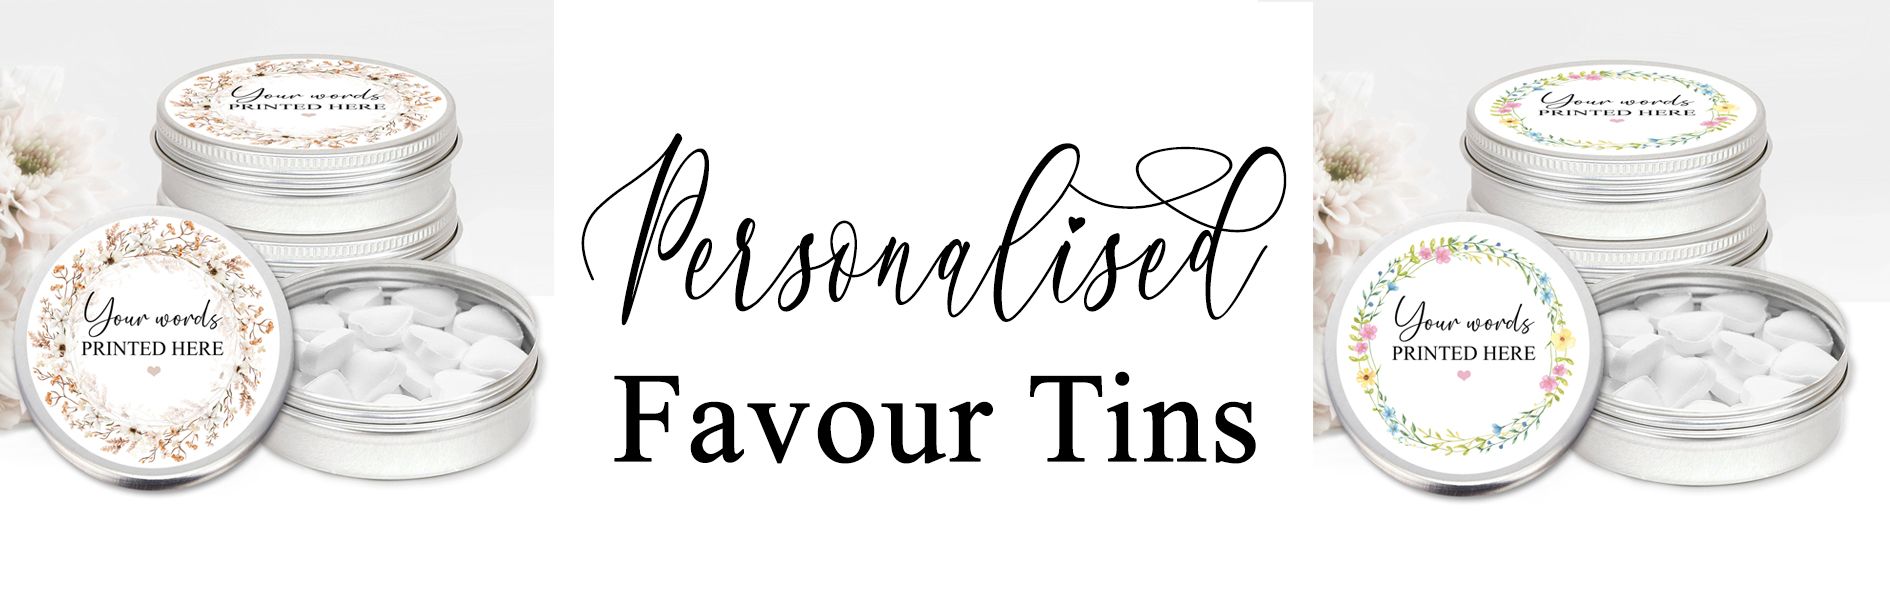 custom personalised favour tins banner